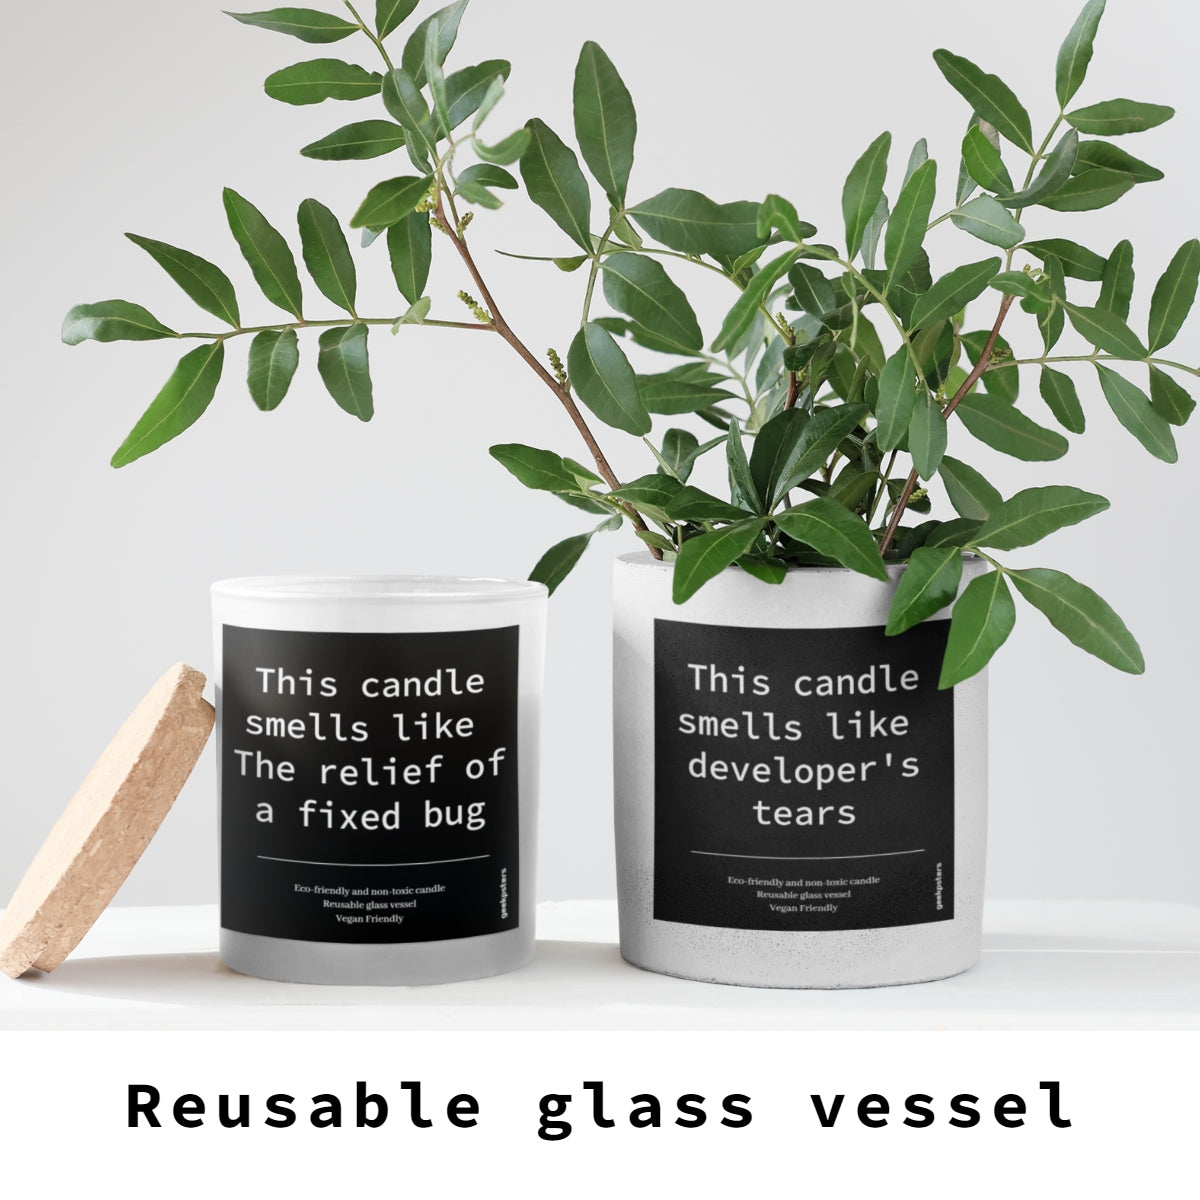 Two This Candle Smells Like Developer's Tears- Scented Soy Candles in reusable glass vessels labeled humorously with "smells like the relief of a fixed bug" and "smells like developer's tears," accompanied by a green plant branch.